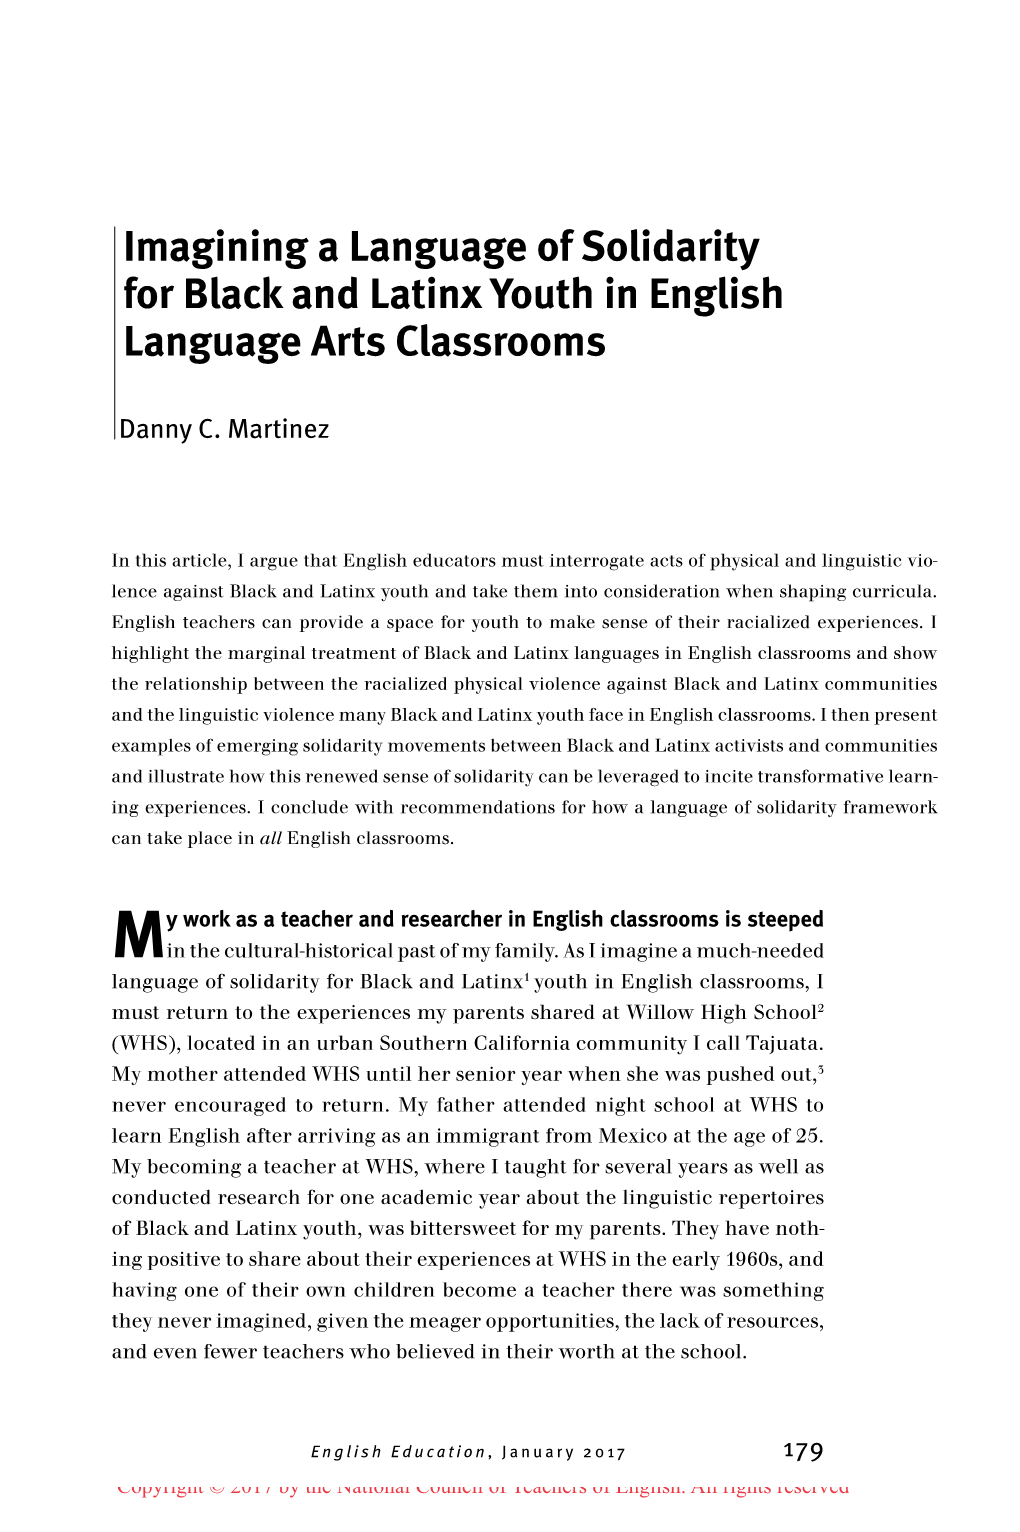 Imagining a Language of Solidarity for Black and Latinx Youth in English Language Arts Classrooms